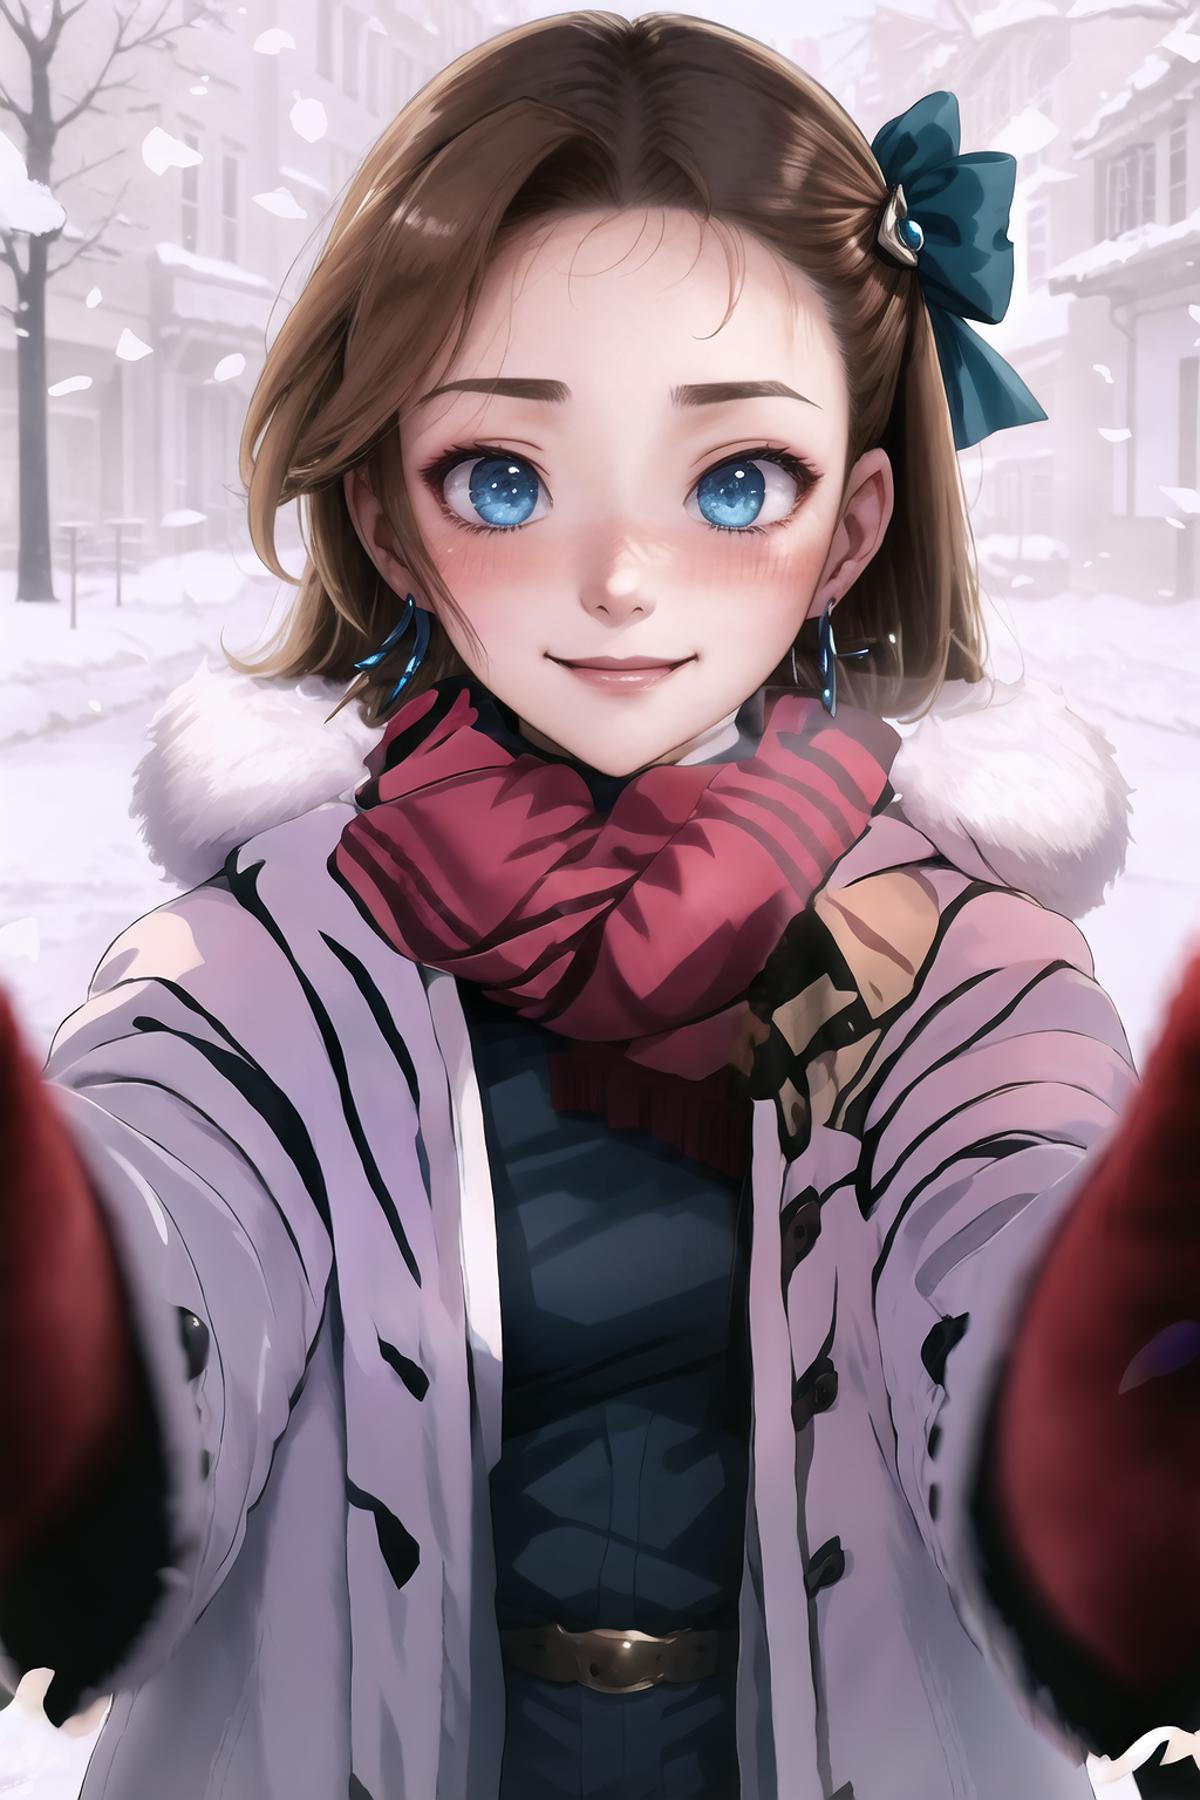 A girl with blue eyes and a bow in her hair is taking a selfie in a winter coat.